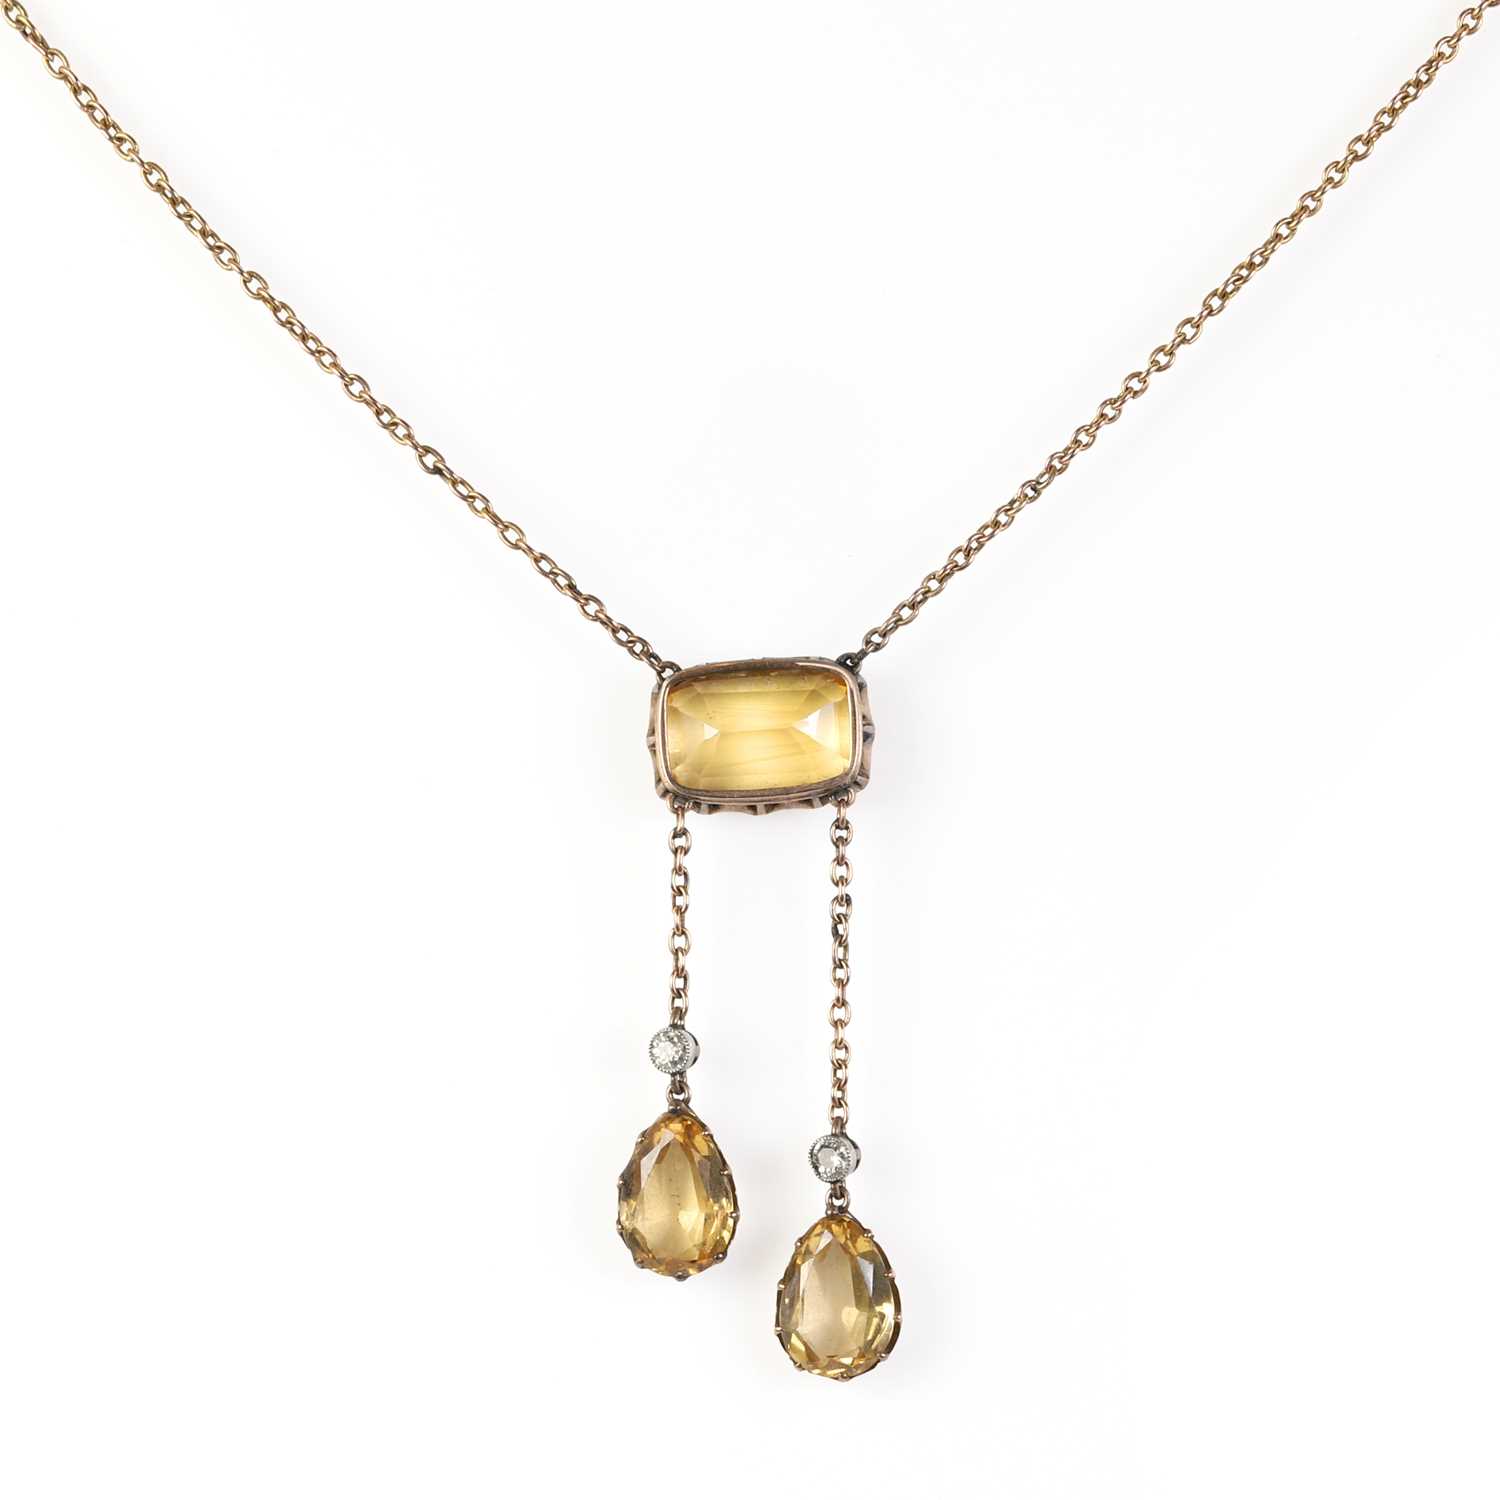 An Edwardian yellow topaz and diamond negligee necklace, - Image 4 of 4